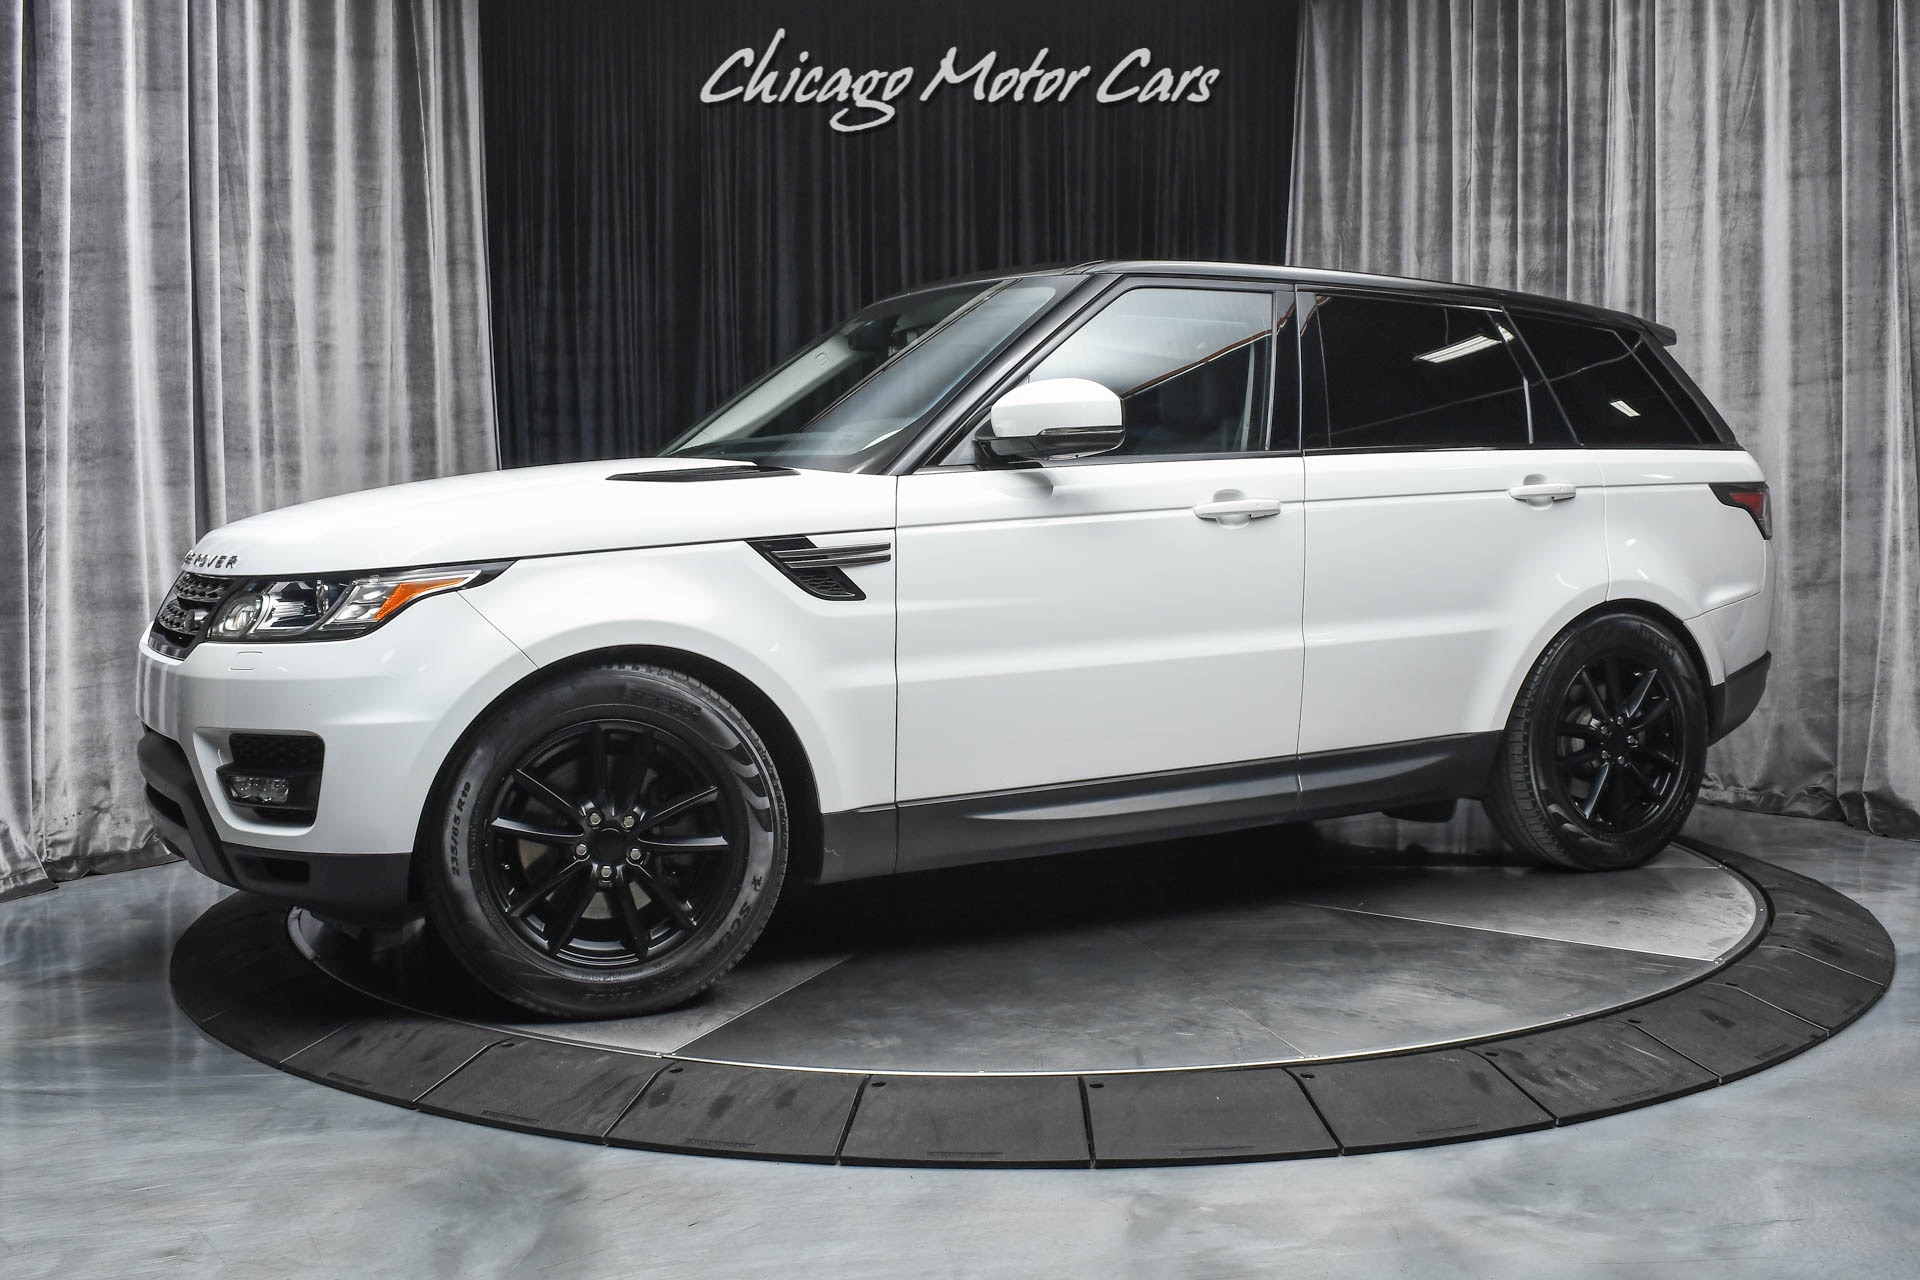 Used Rover Range Rover Sport SE $69k+MSRP! Panoramic Roof! Climate Comfort and Visibility Pack! For Sale (Special Pricing) | Chicago Motor Cars Stock #17779A